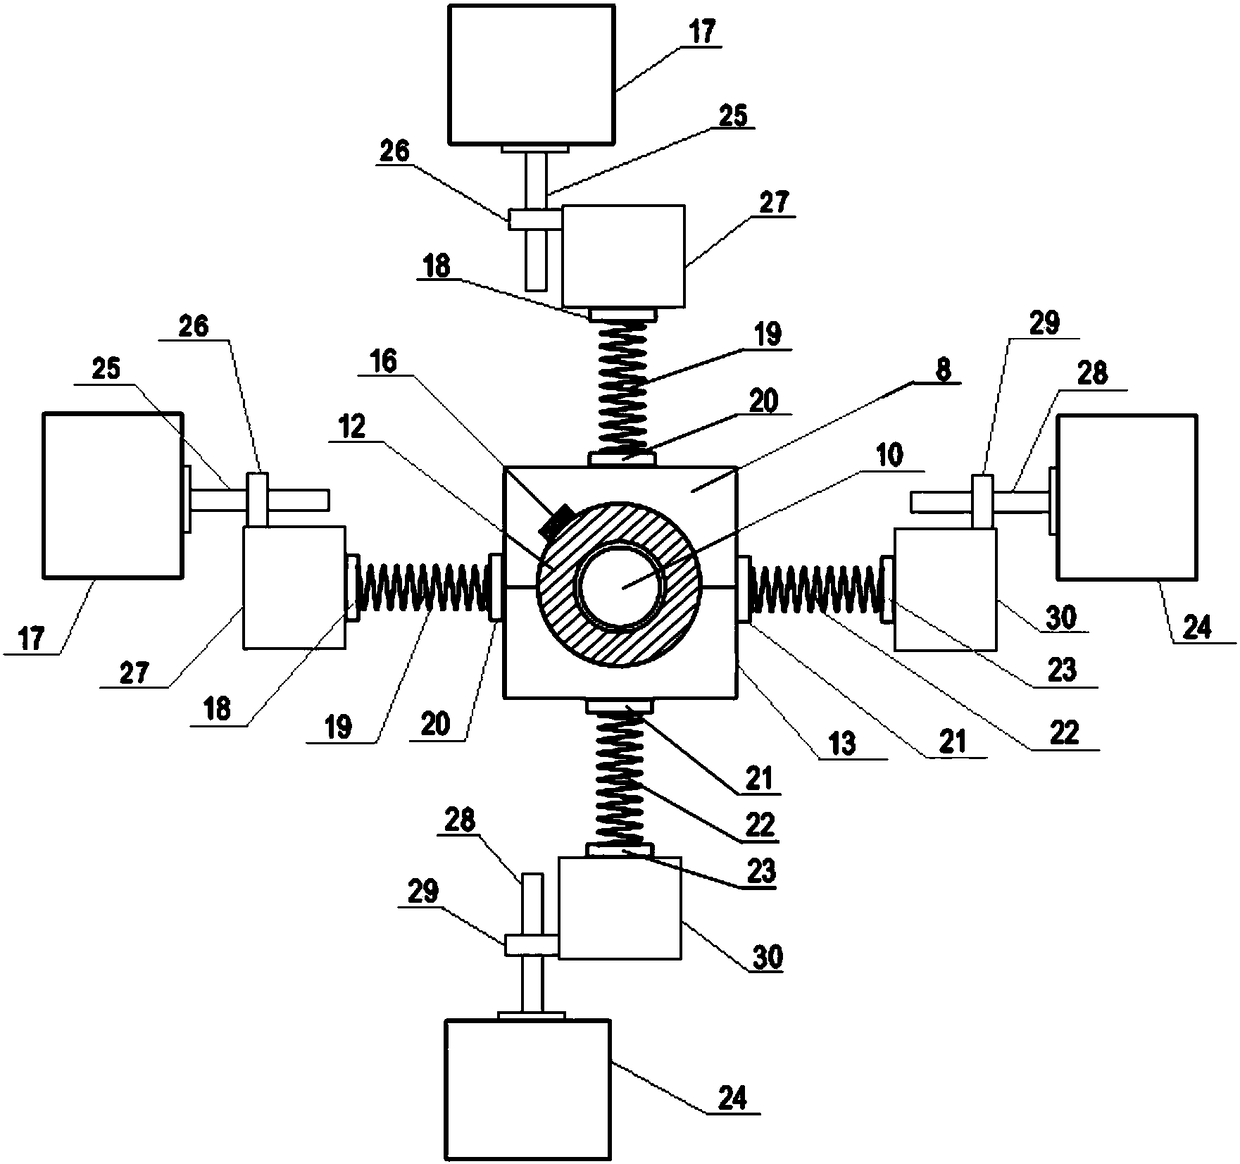 Rolling bearing performance testing device for applying radial alternating loads based on lead screw transmission